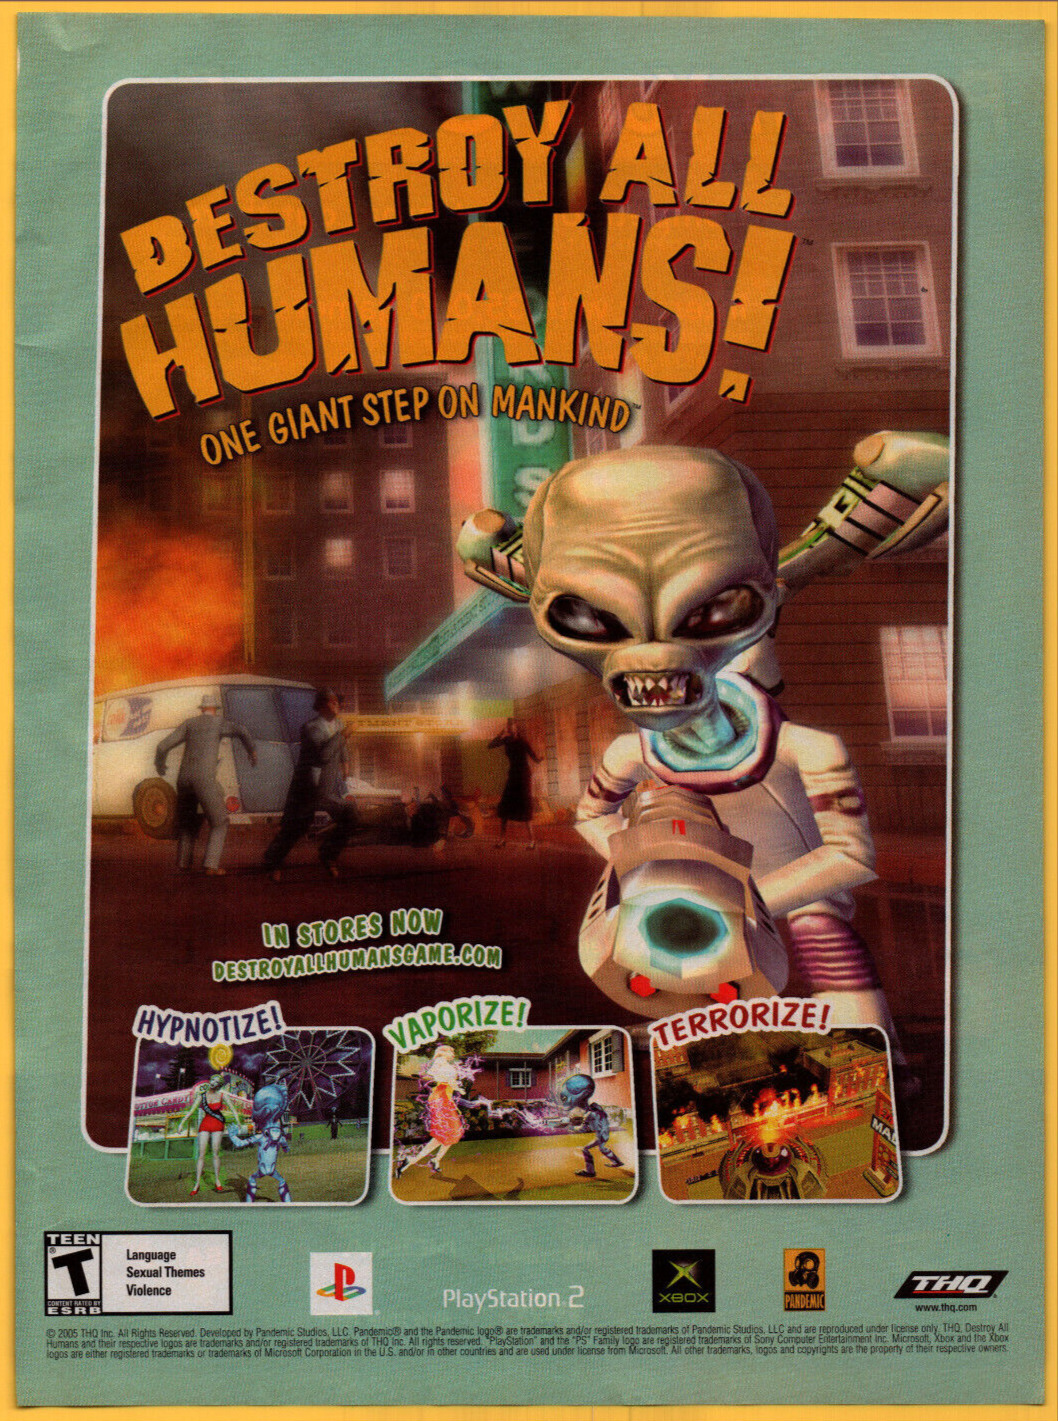 Destory All Humans One Giant Step Mankind Game Print Ad / Poster Promo Art 2005